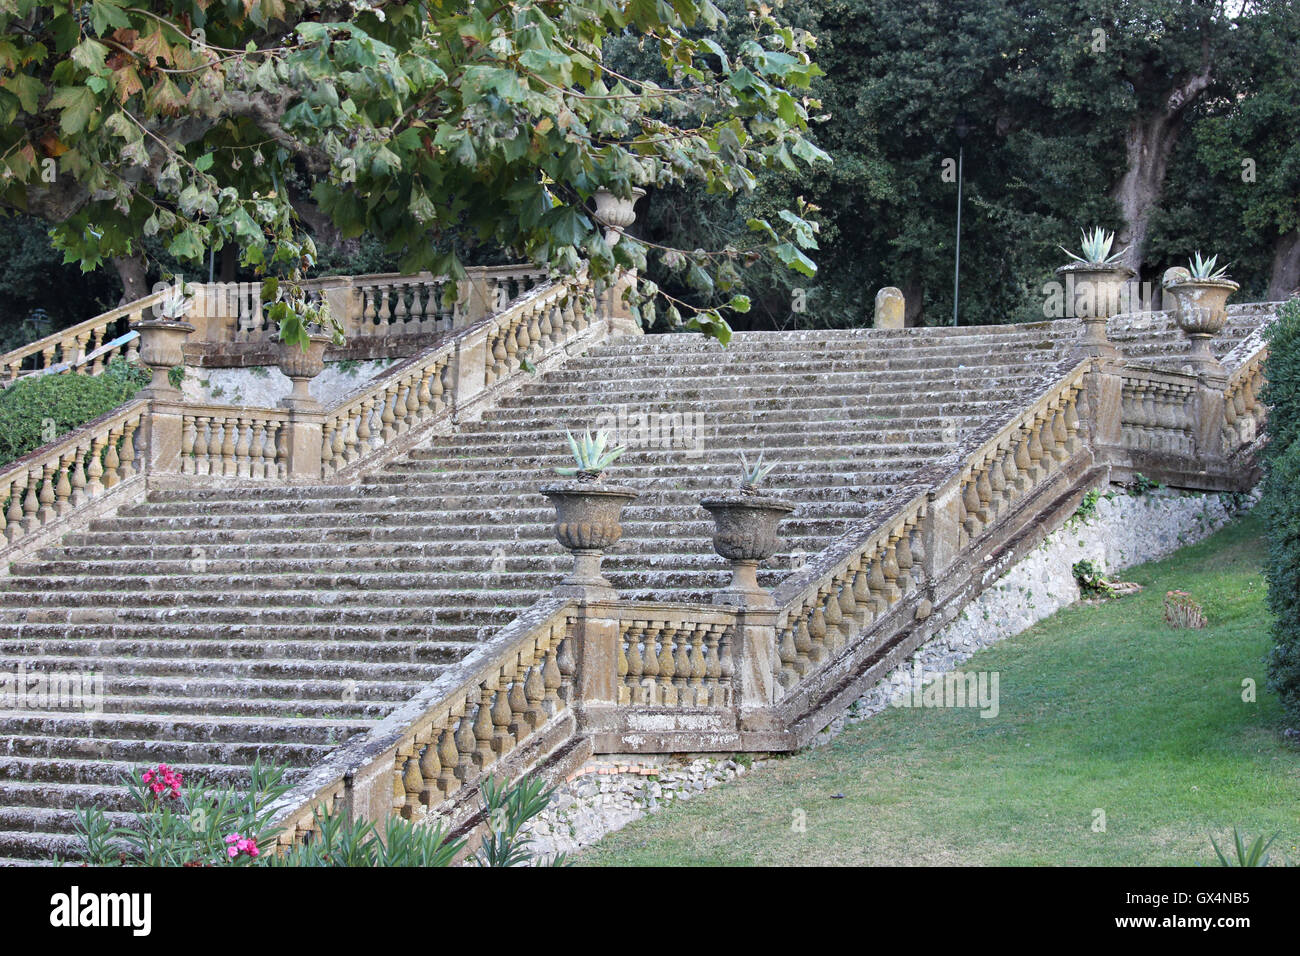 a beautiful antic stairway/ staircase in Frascati, the gardens of Villa Torlonia, ville tuscolane, Italy Stock Photo